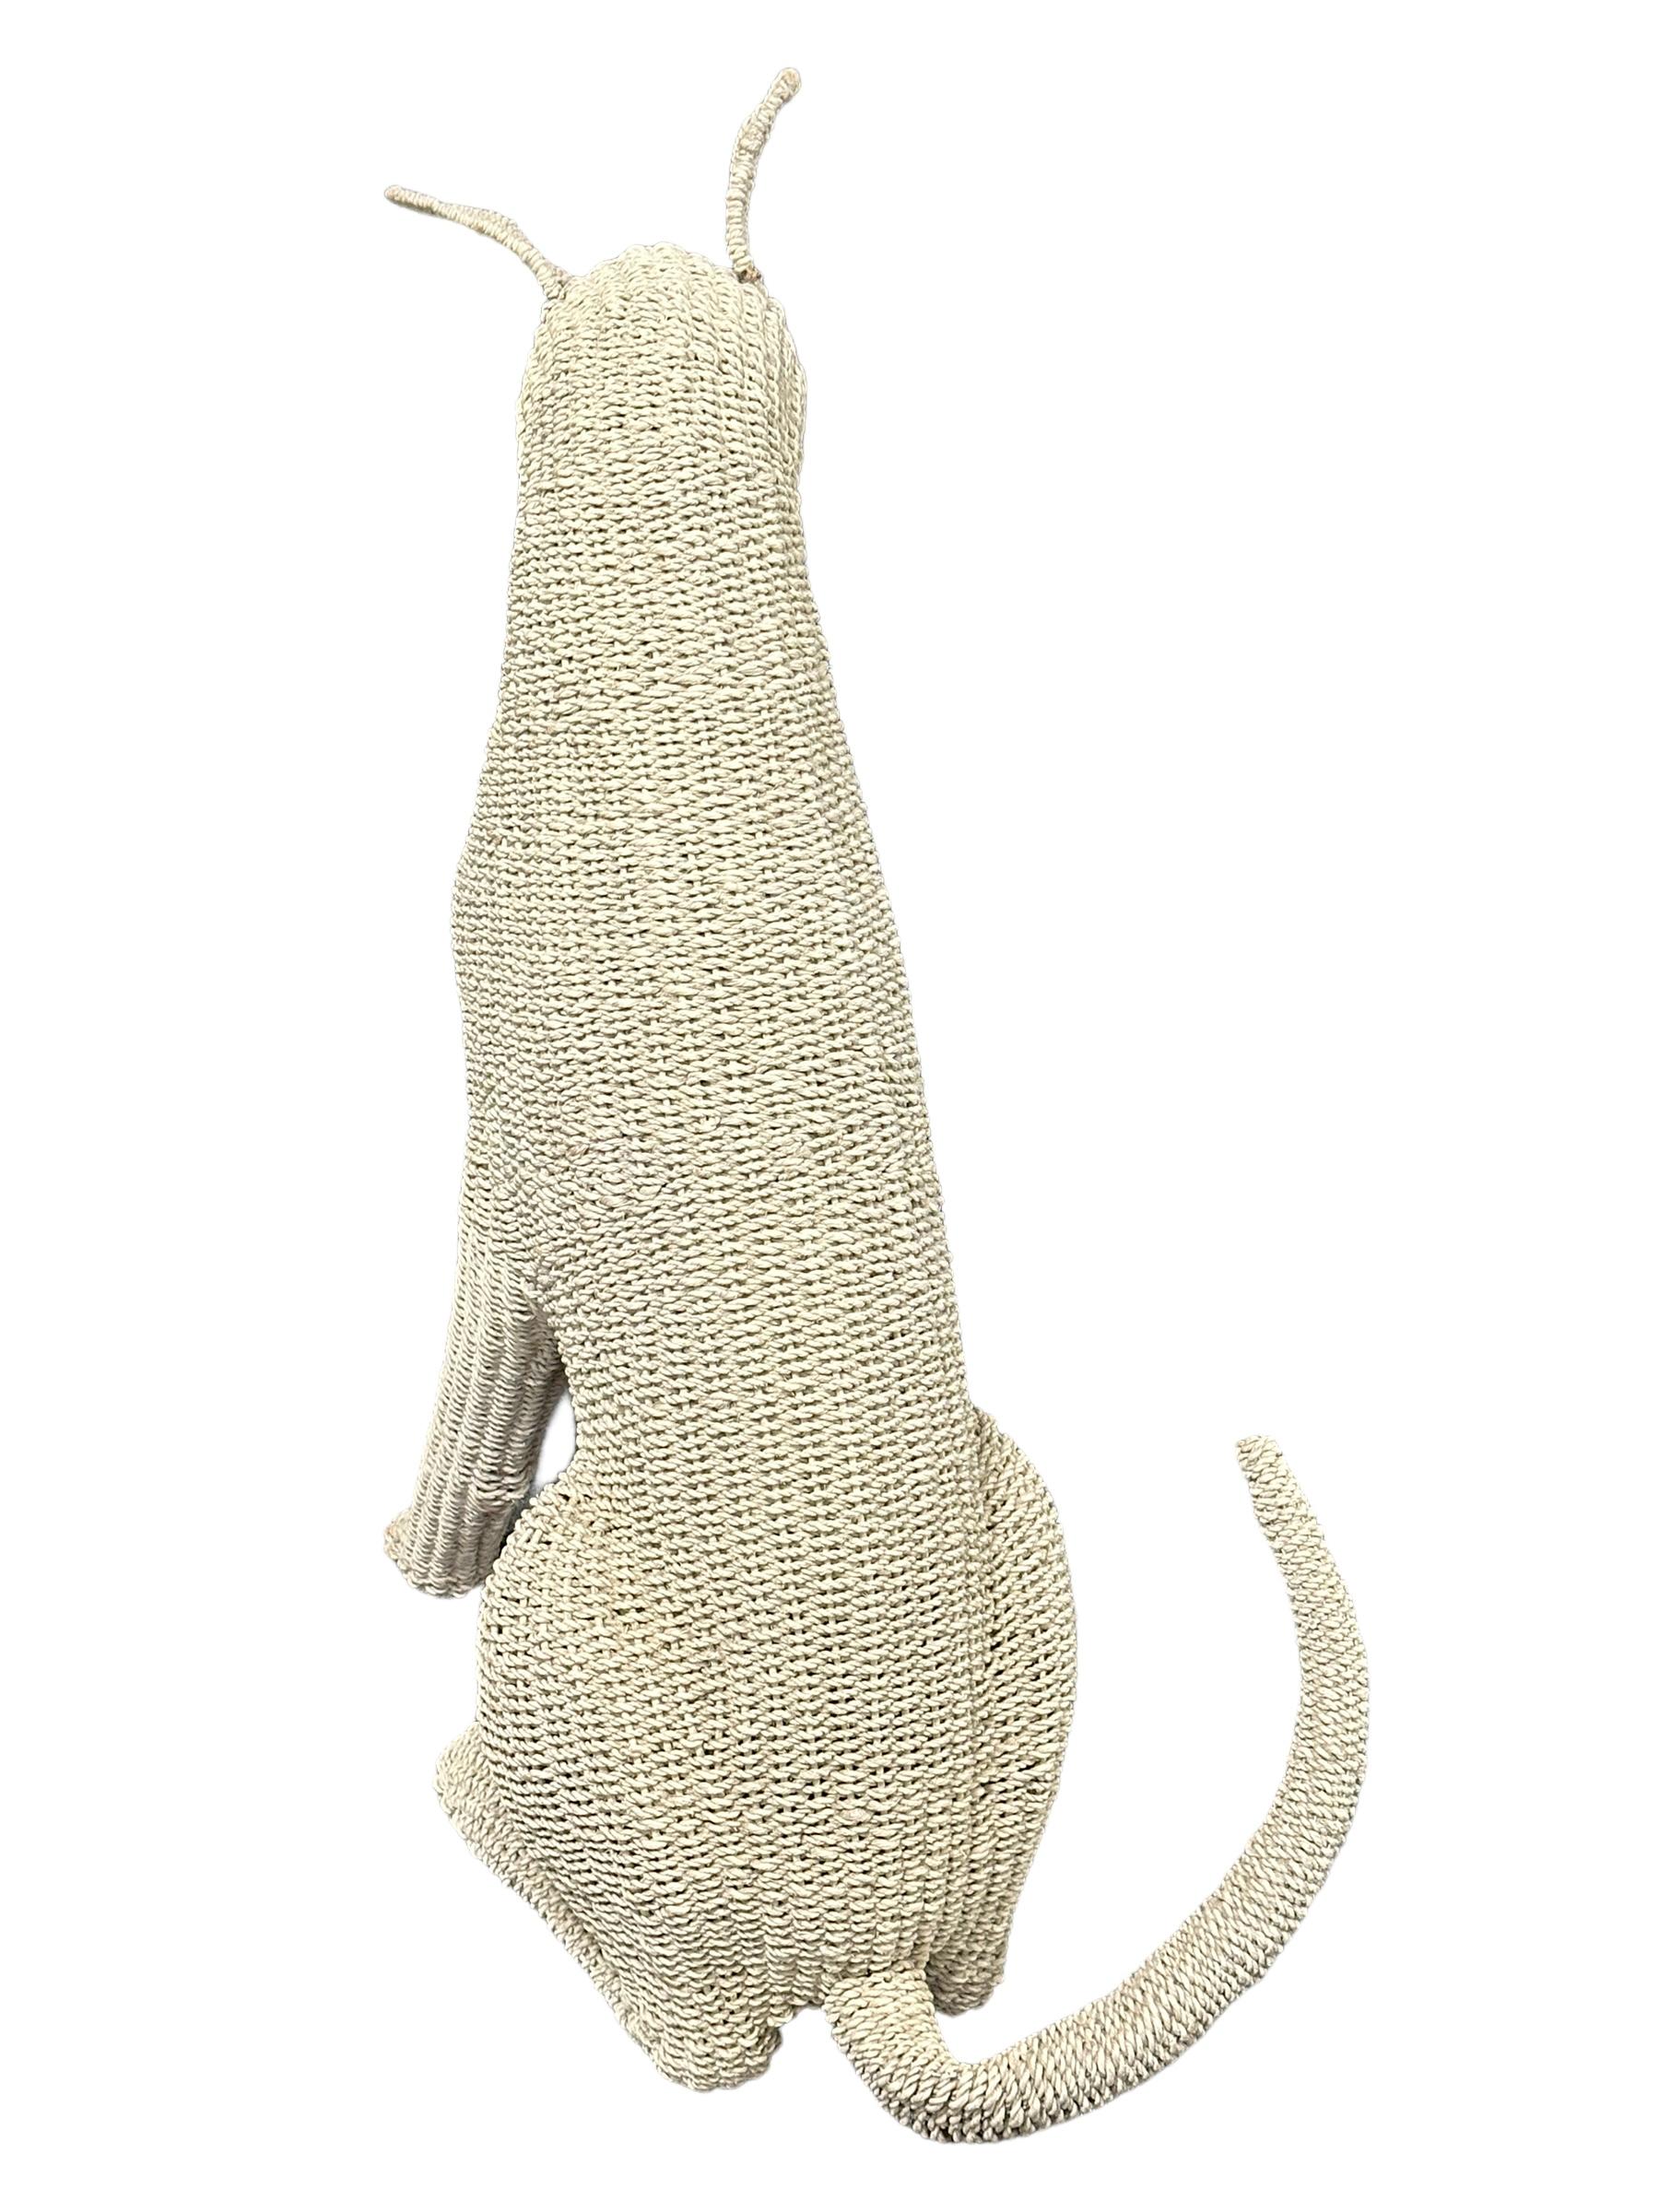 Stunning Life Size White Rattan Wicker Dog Statue Figure, Italy, 1960s In Good Condition For Sale In Nuernberg, DE